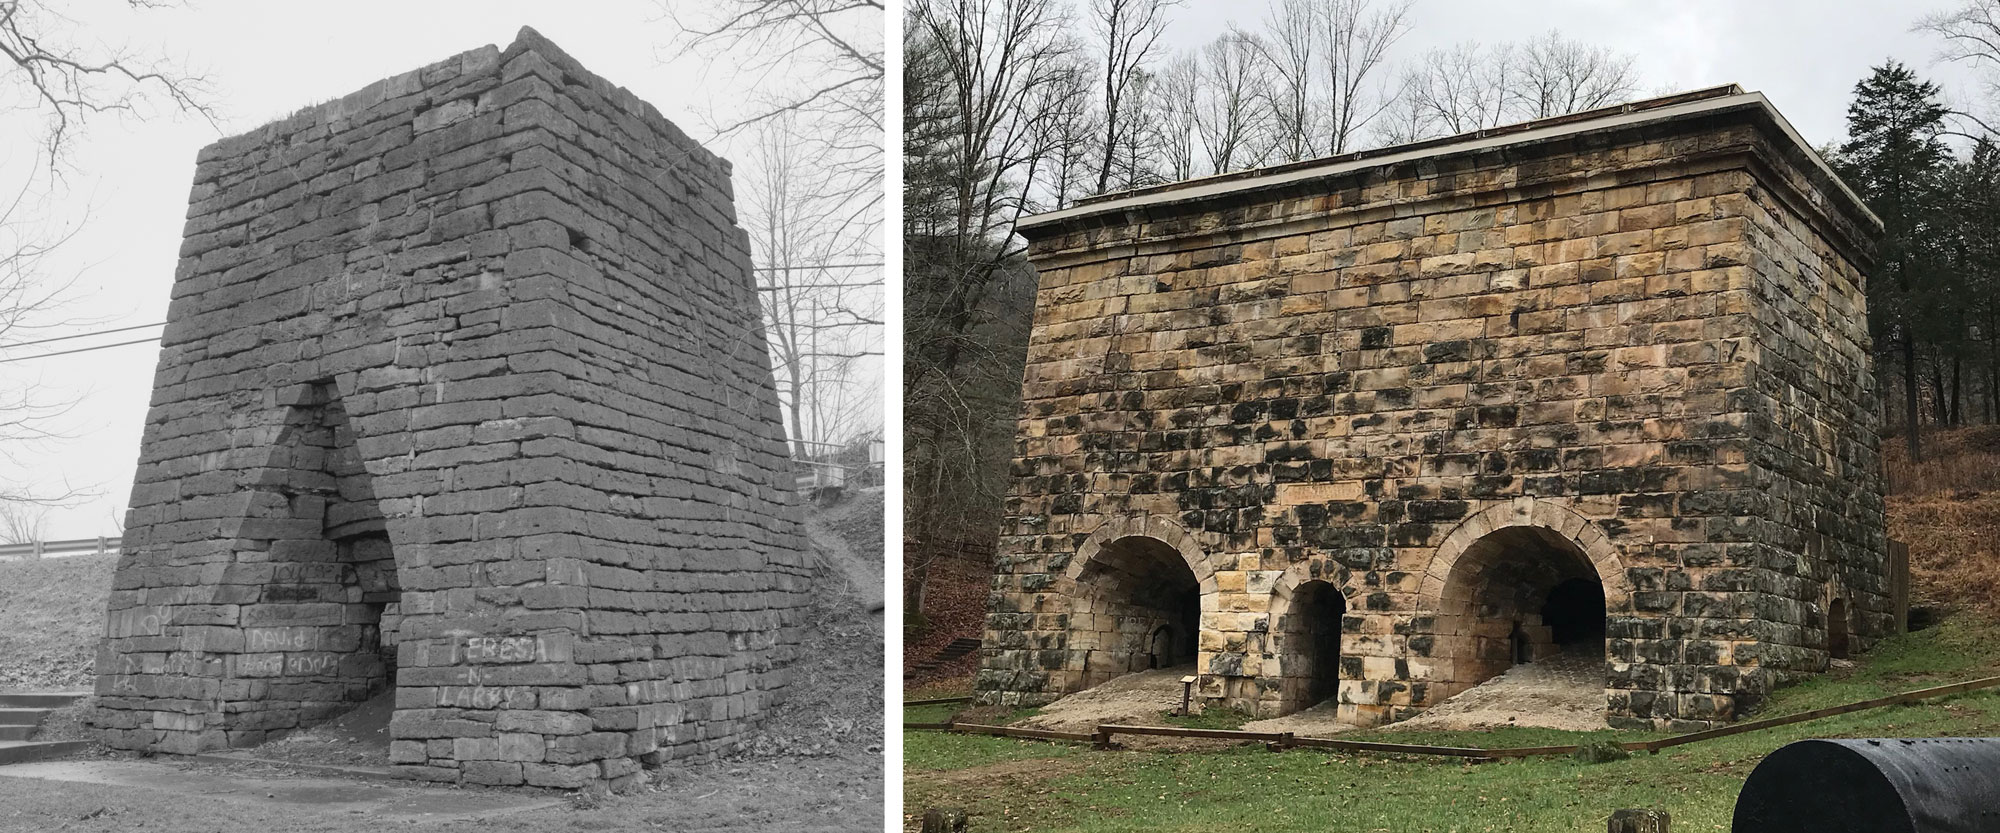 2-Panel figure showing historical iron furnaces in Kentucky. Panel 1: Black and white photo of furnace with one chimney and tapered opening. Panel 2: Color photo of furnace with two large, arched opening flanking one small arched opening.